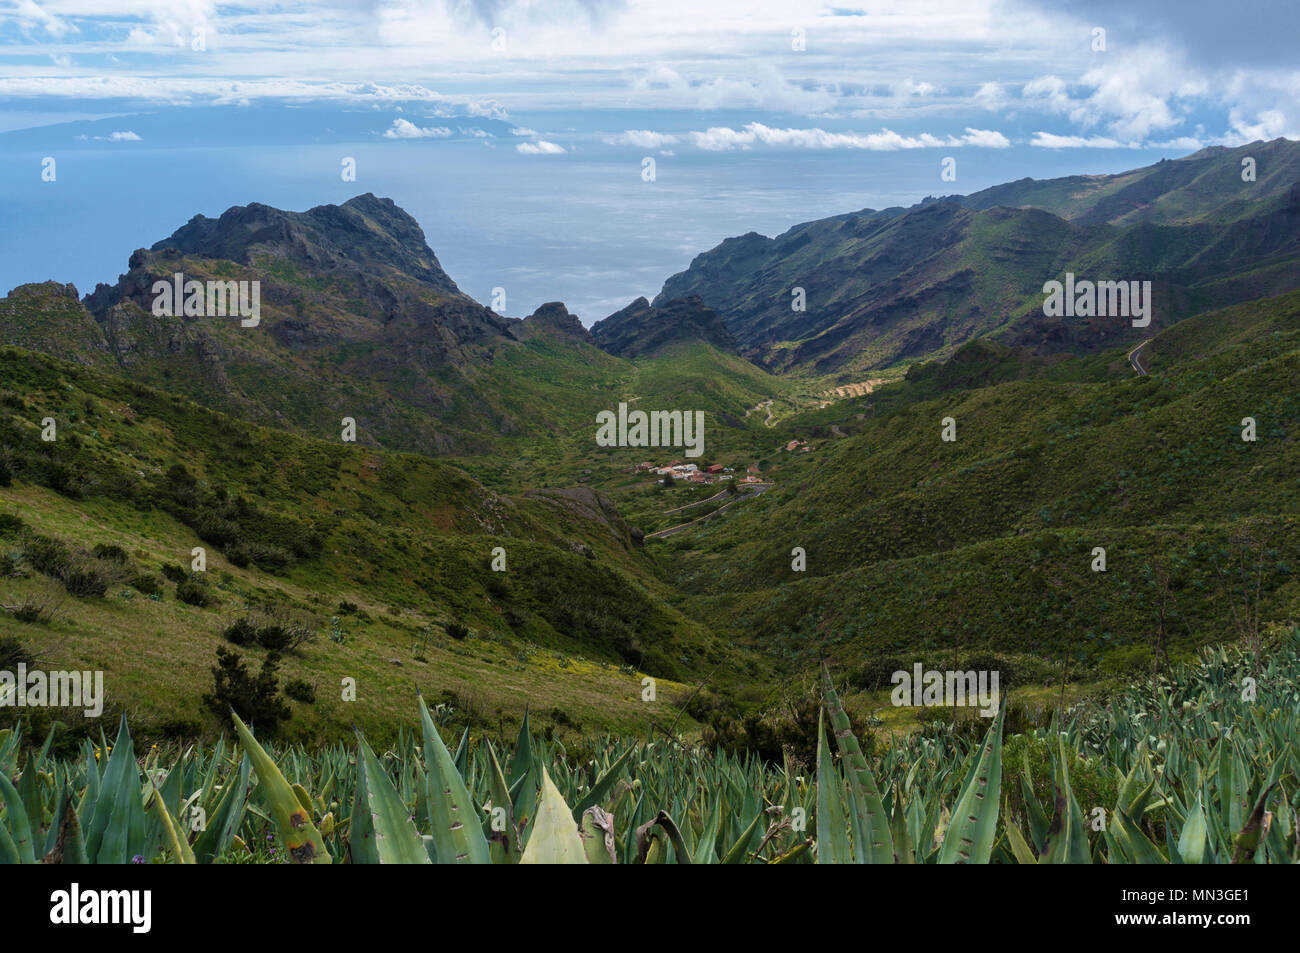 Hilly Landscape with Ocean in Background Stock Photo